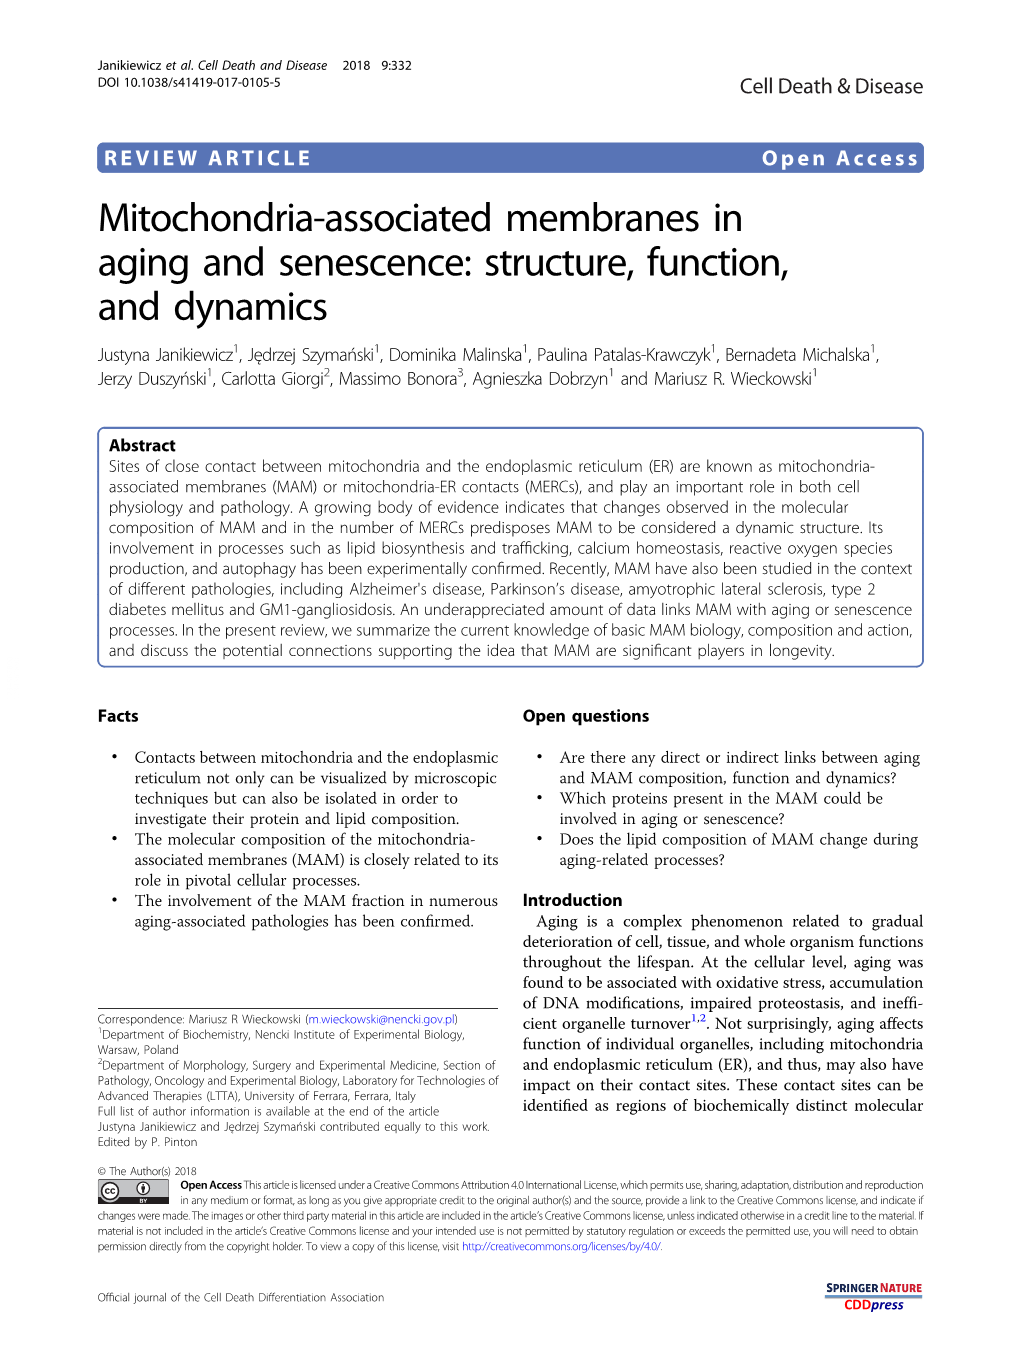 Mitochondria-Associated Membranes in Aging and Senescence: Structure, Function, and Dynamics